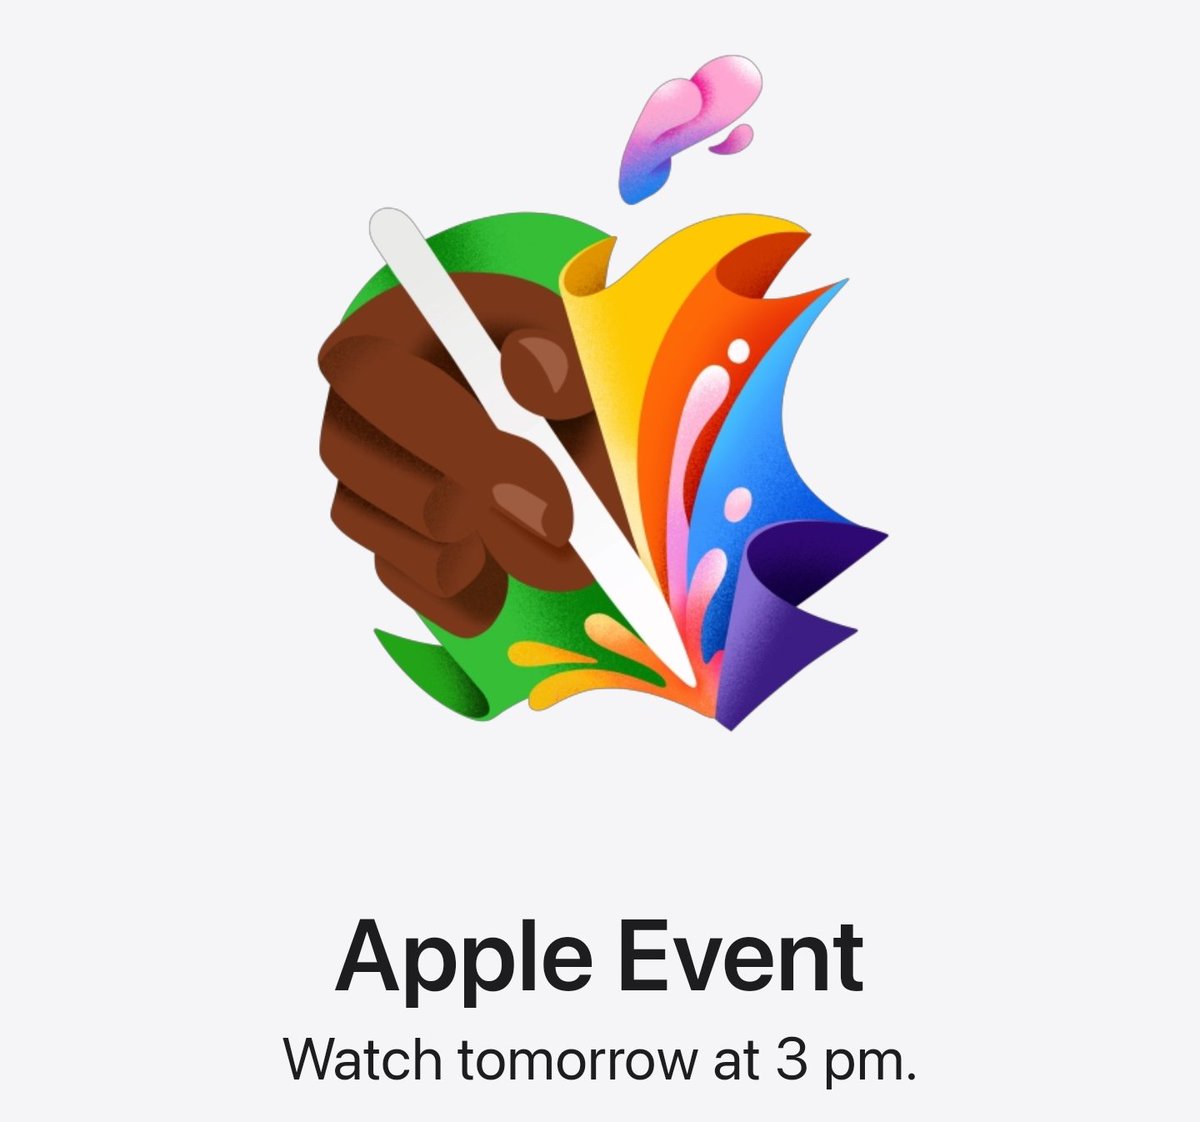 will you be watching the new #AppleEvent tomorrow? for the new iPads ✨️